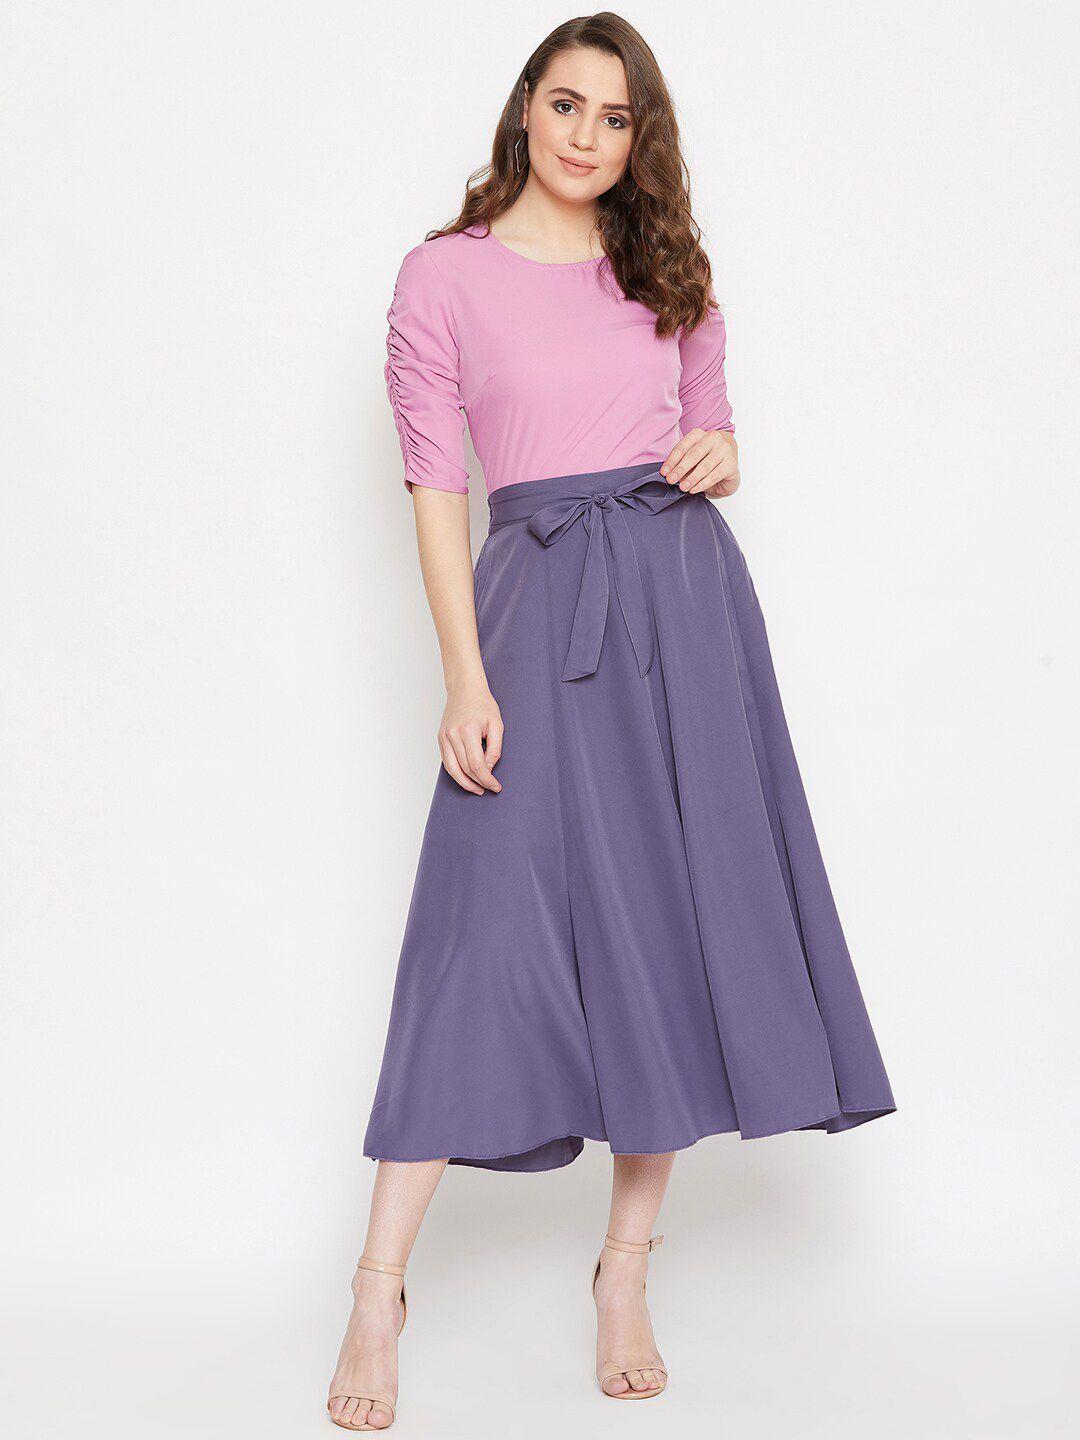 bitterlime women pink & purple top with flared skirt